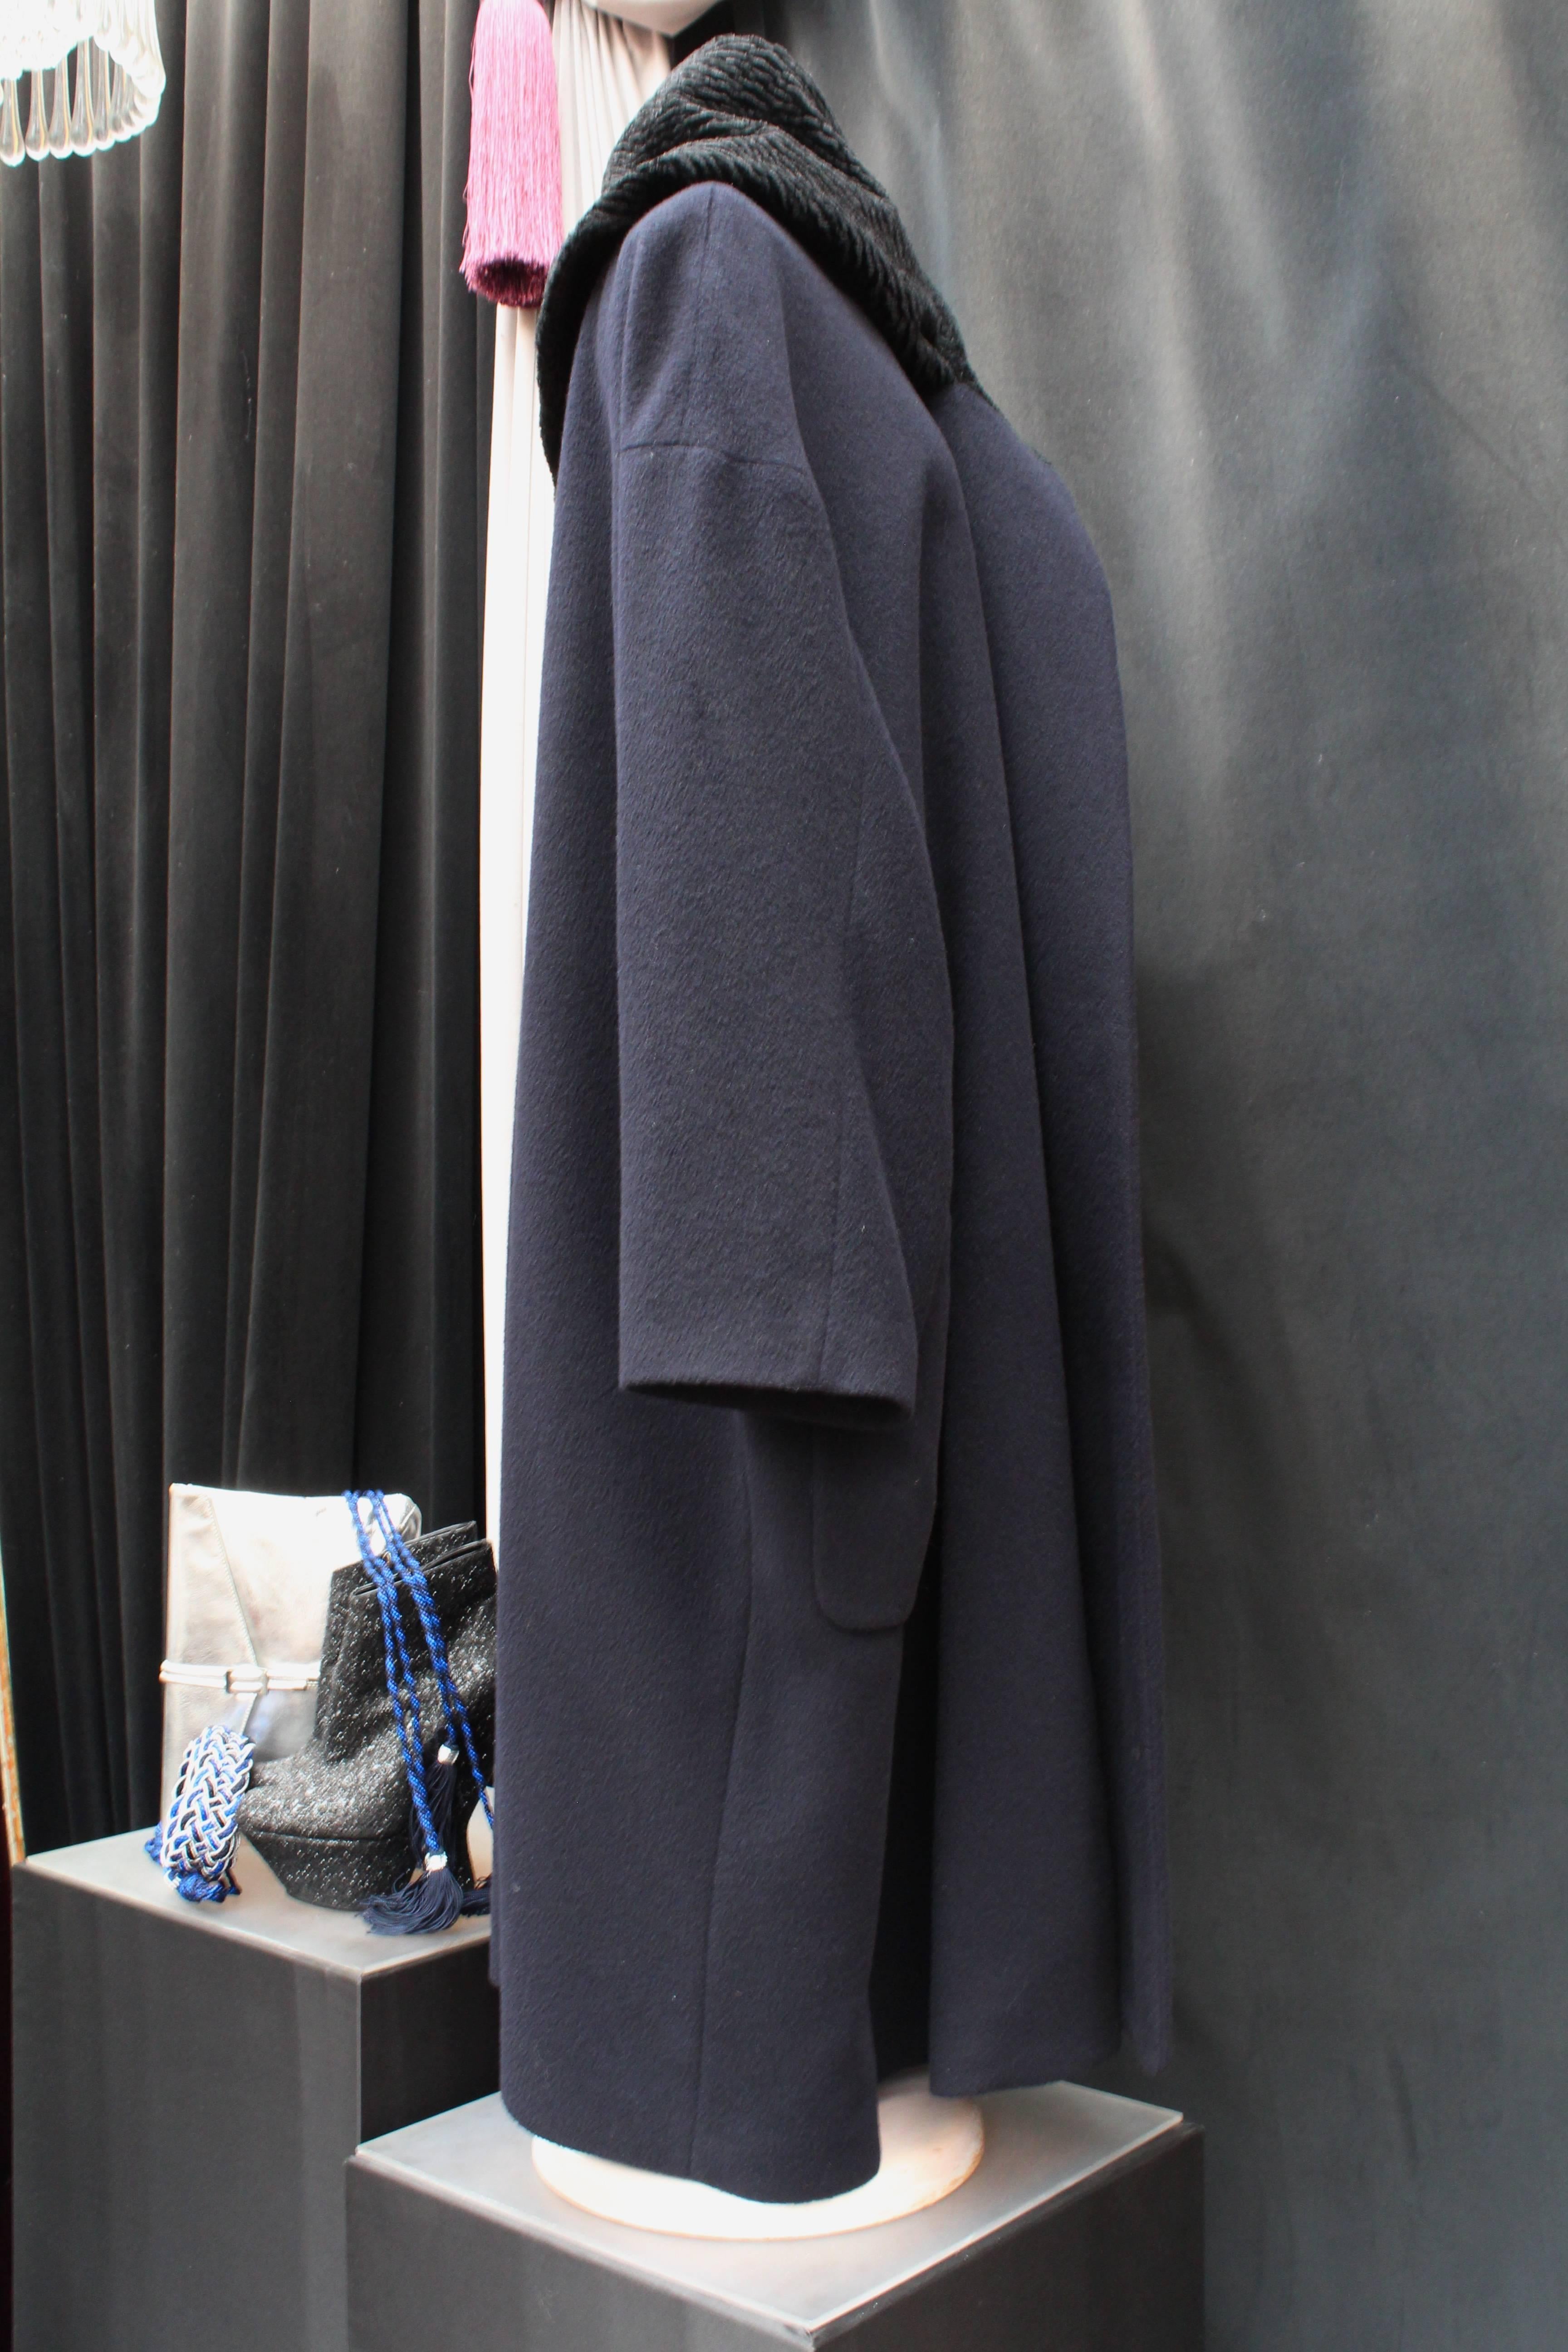 1980 - 90s Comme des Garcons Oversized Coat in Navy Blue and Black Wool Coat 1